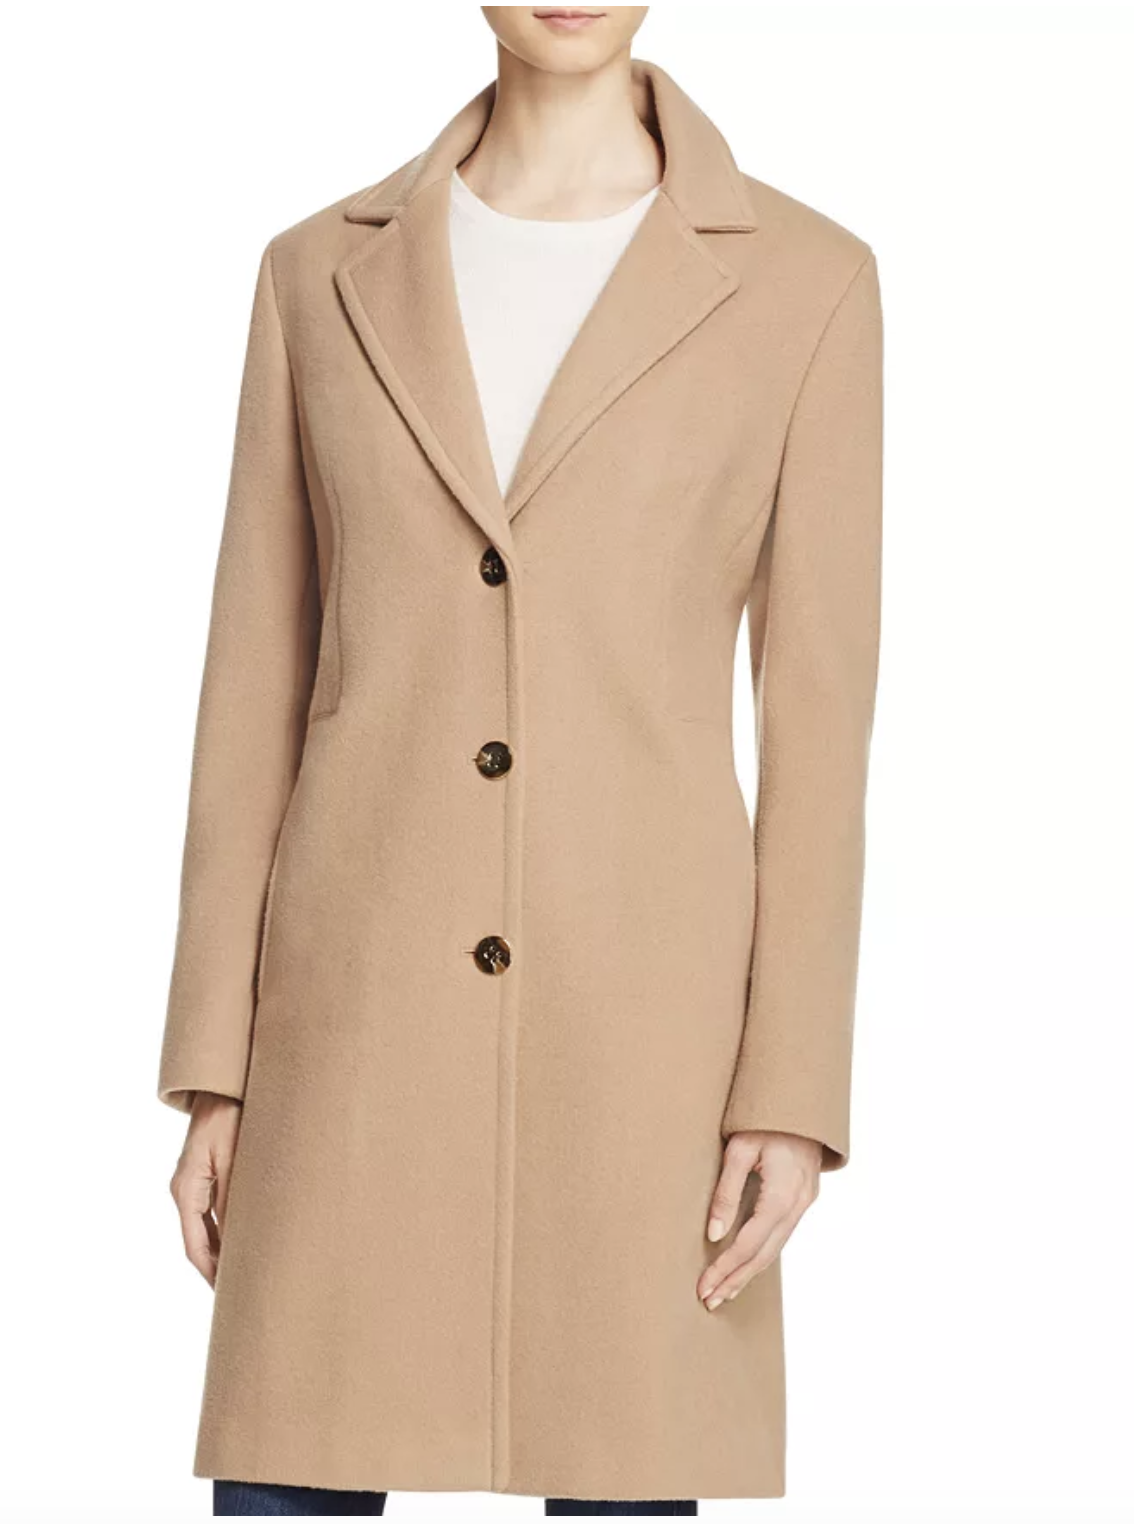 The Camel Coat : Essential for the Colder Months 